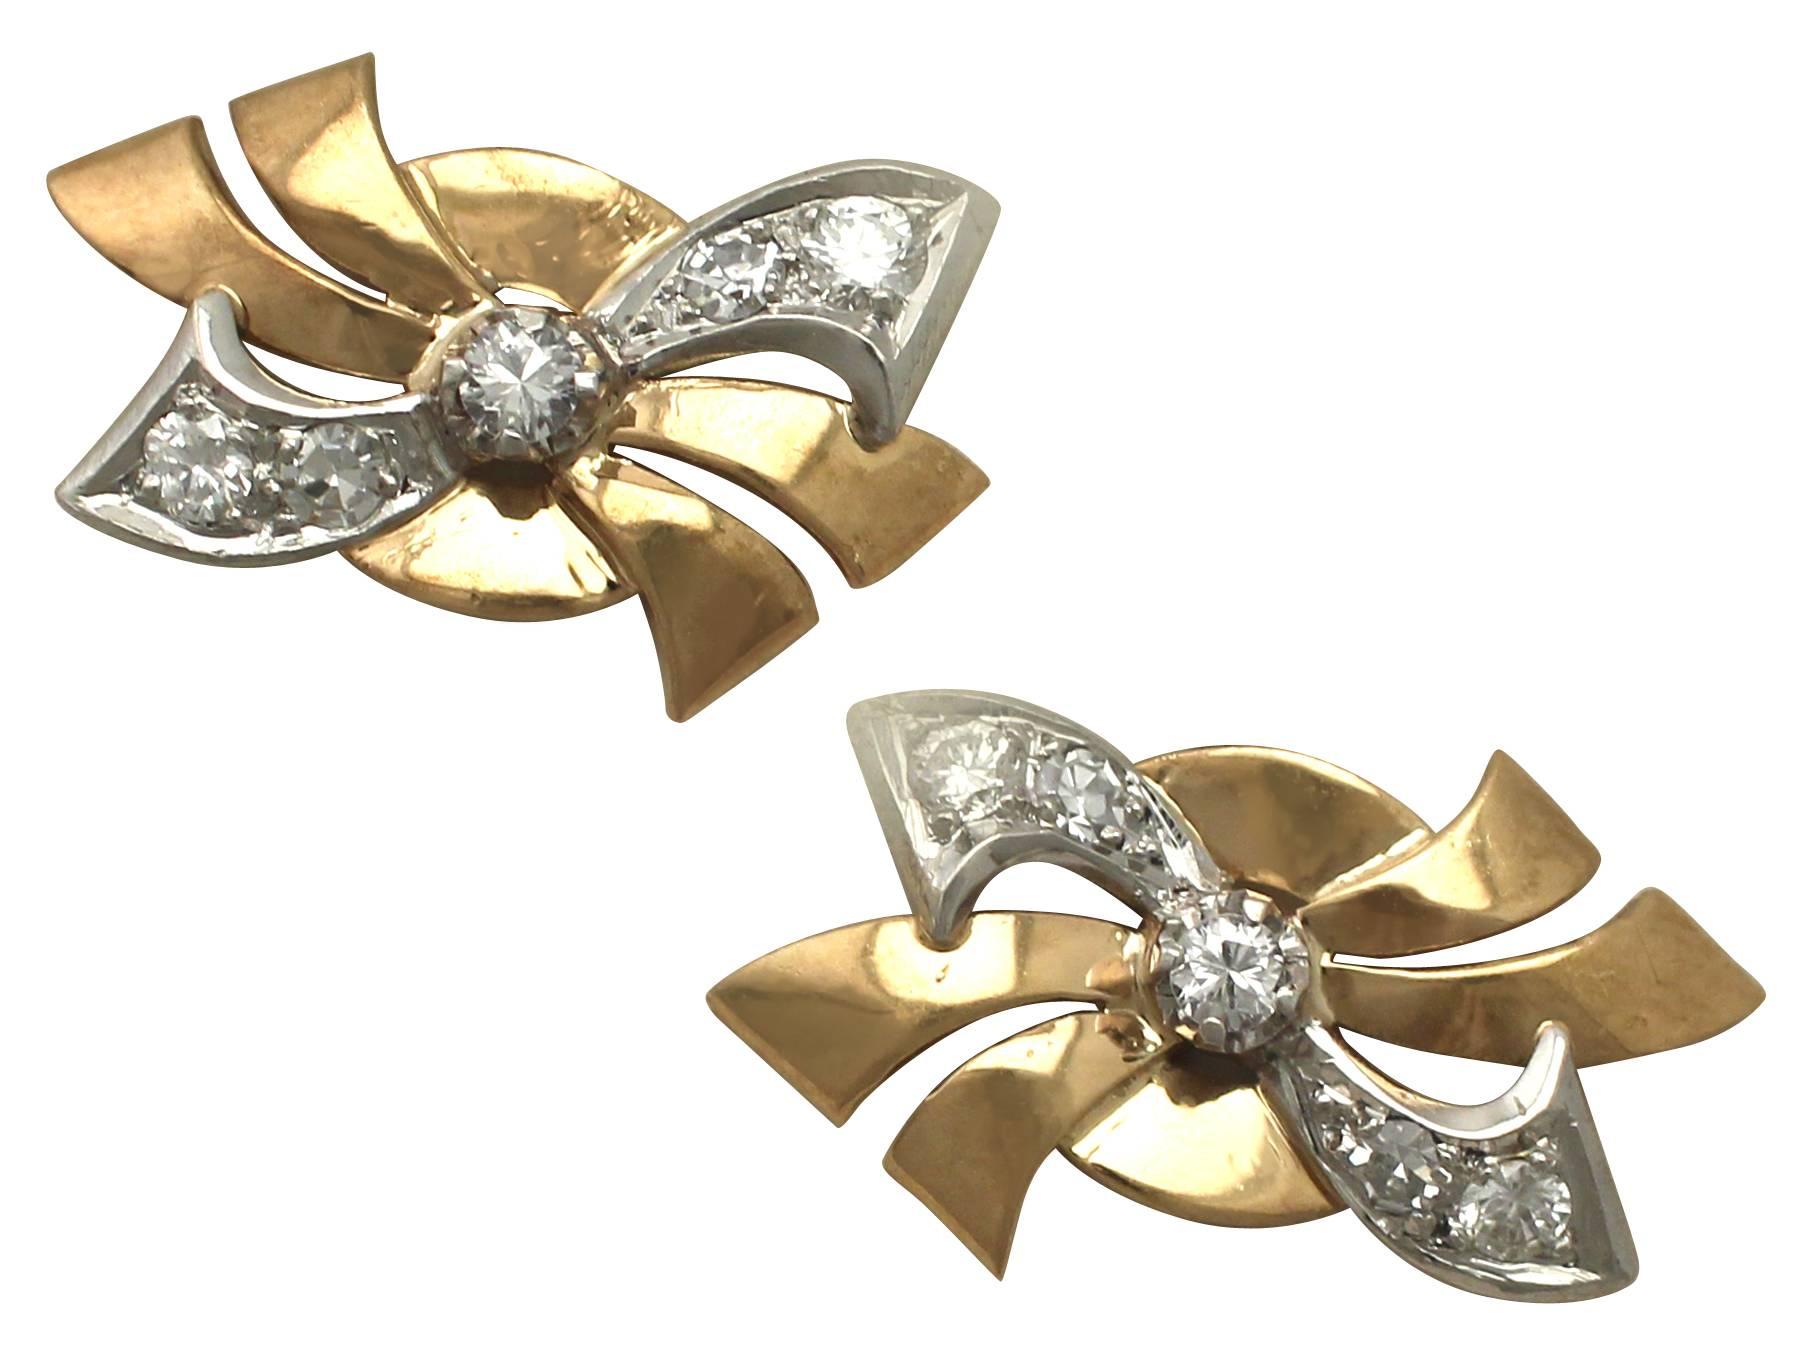 An impressive pair of vintage 0.30 Carat diamond and 18 karat yellow gold, 18 karat white gold set stud earrings; part of our diverse antique jewelry and estate jewelry collections

These fine and impressive vintage French stud earrings have been